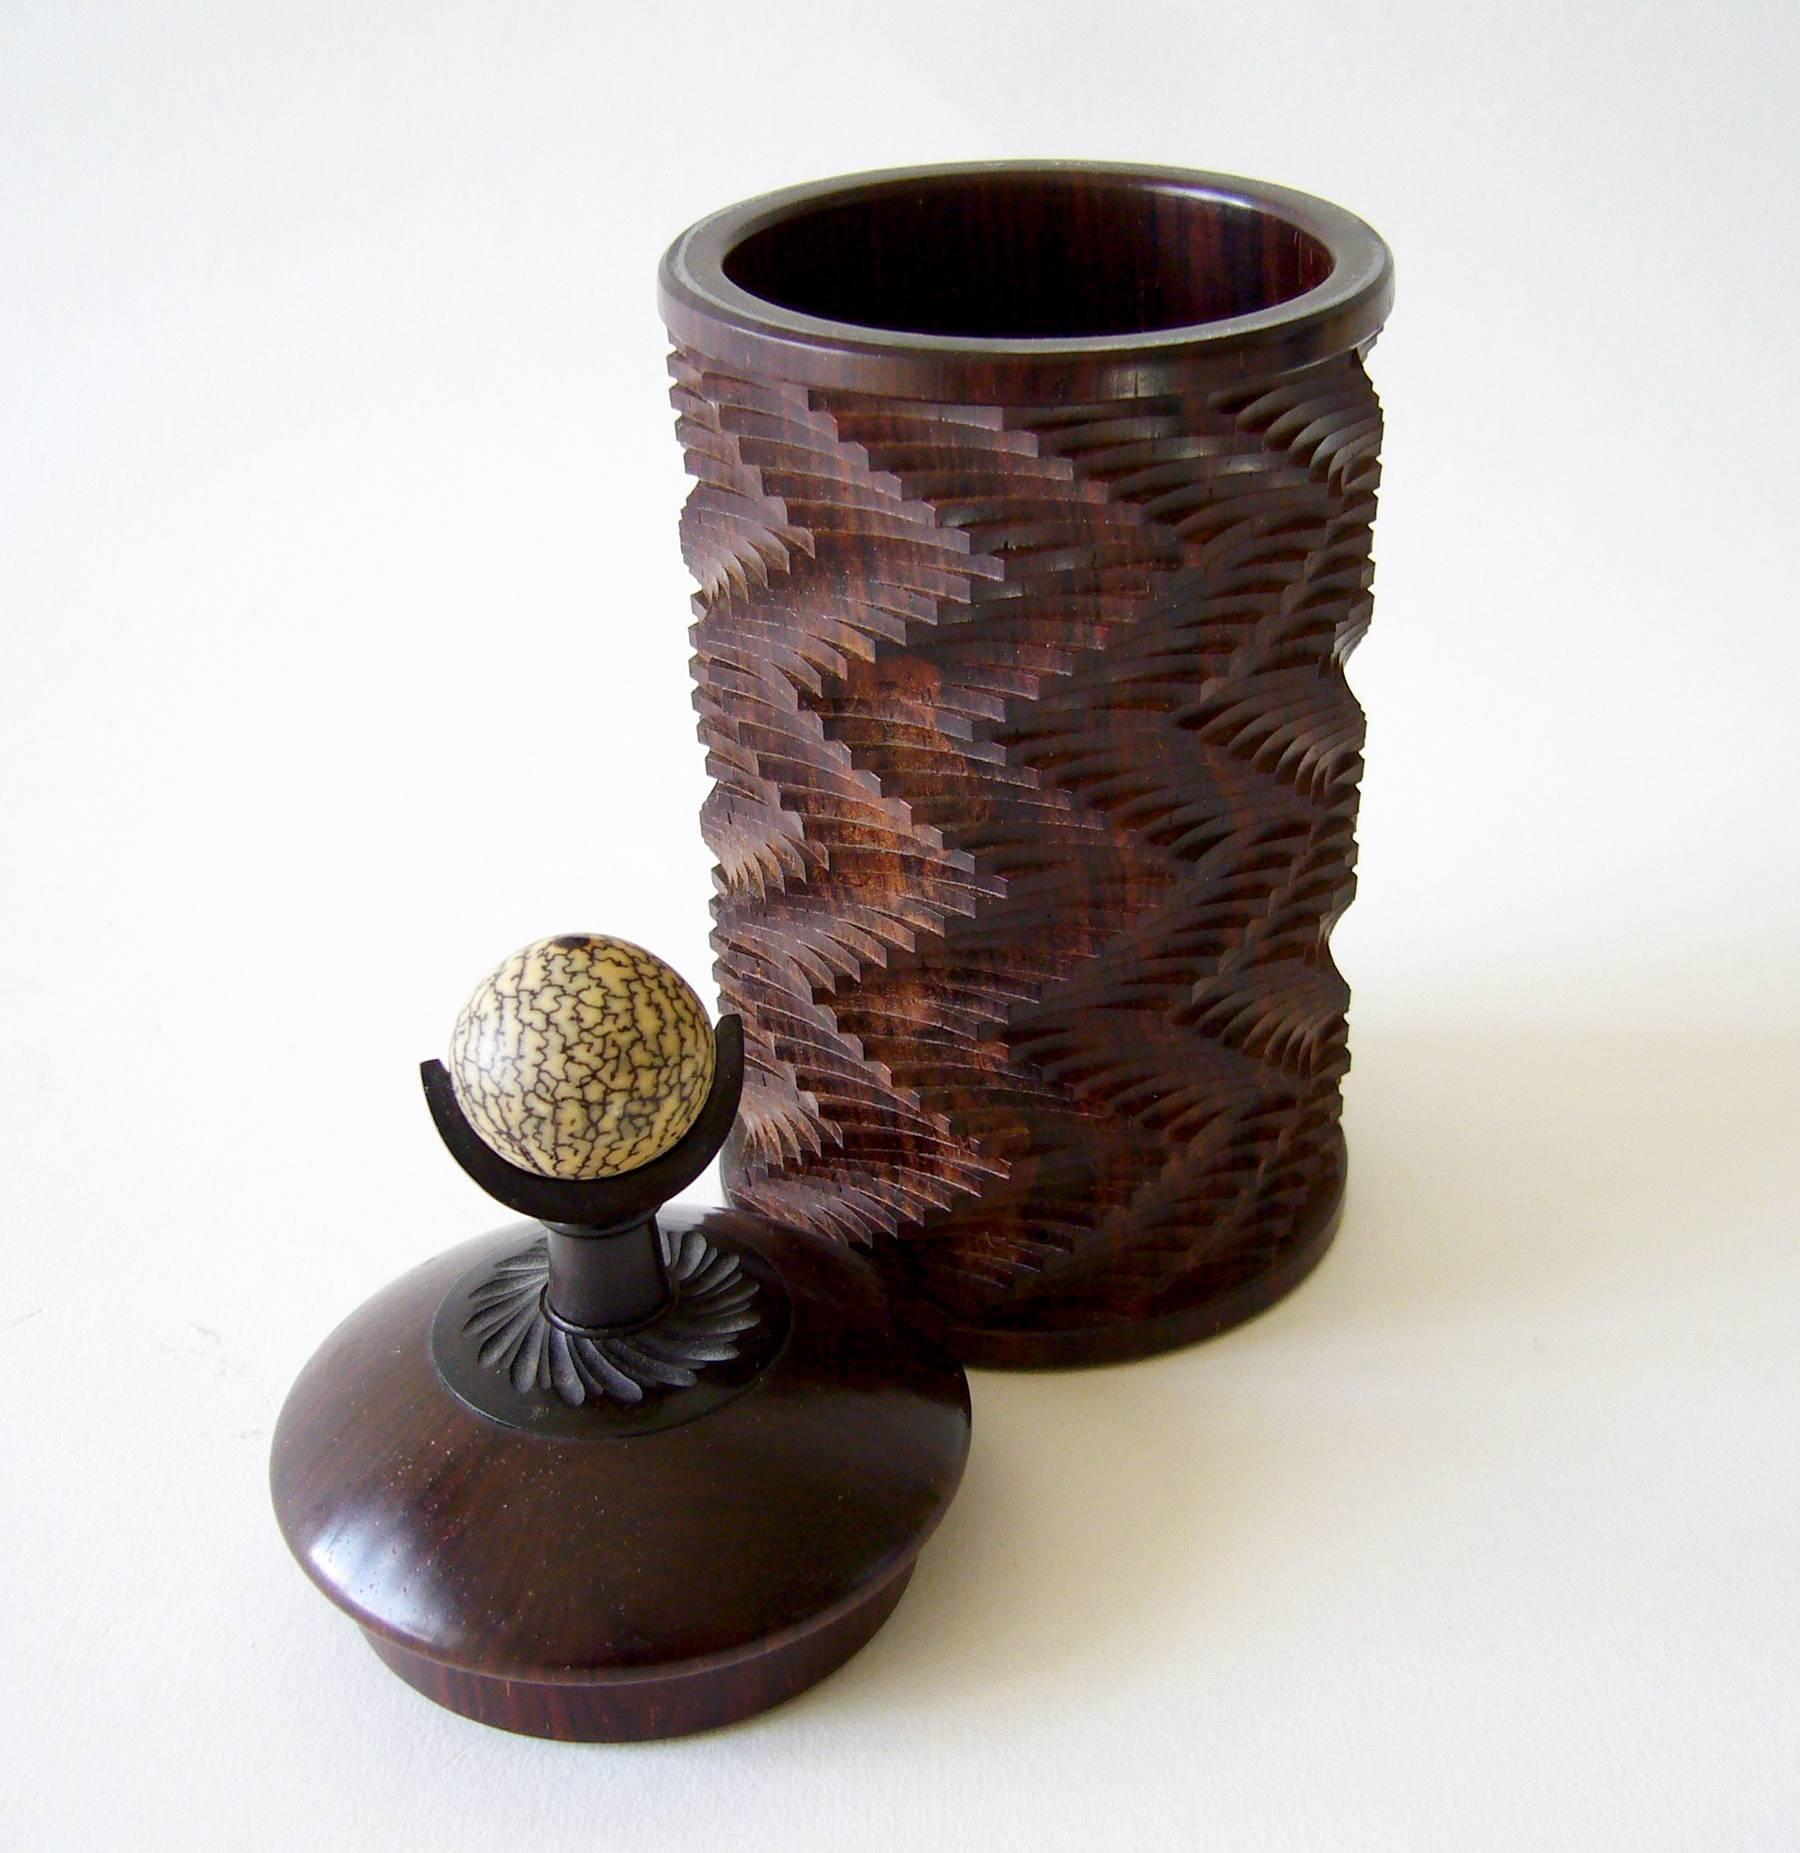 Zig zag patterned cocobolo, blackwood and betel nut lidded box created by Jon Sauer of San Francisco, California. Box measures 7